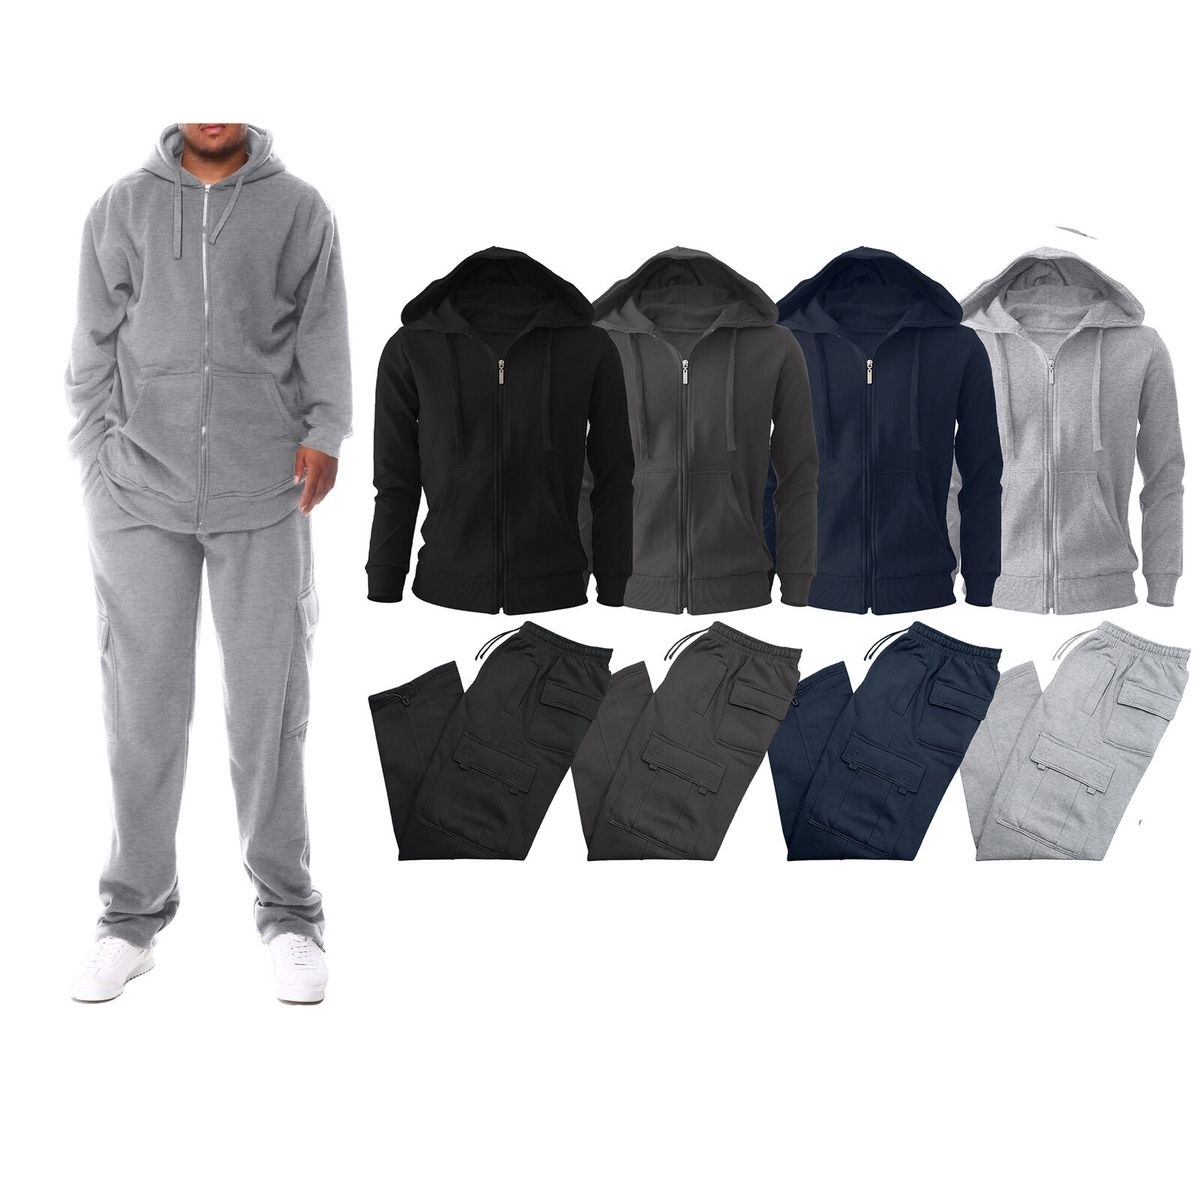 Multi-Pack: Men's Big & Tall Winter Warm Athletic Active Cozy Fleece Lined Multi-Pocket Full Zip Up Cargo Tracksuit - Navy, 1-pack, Large